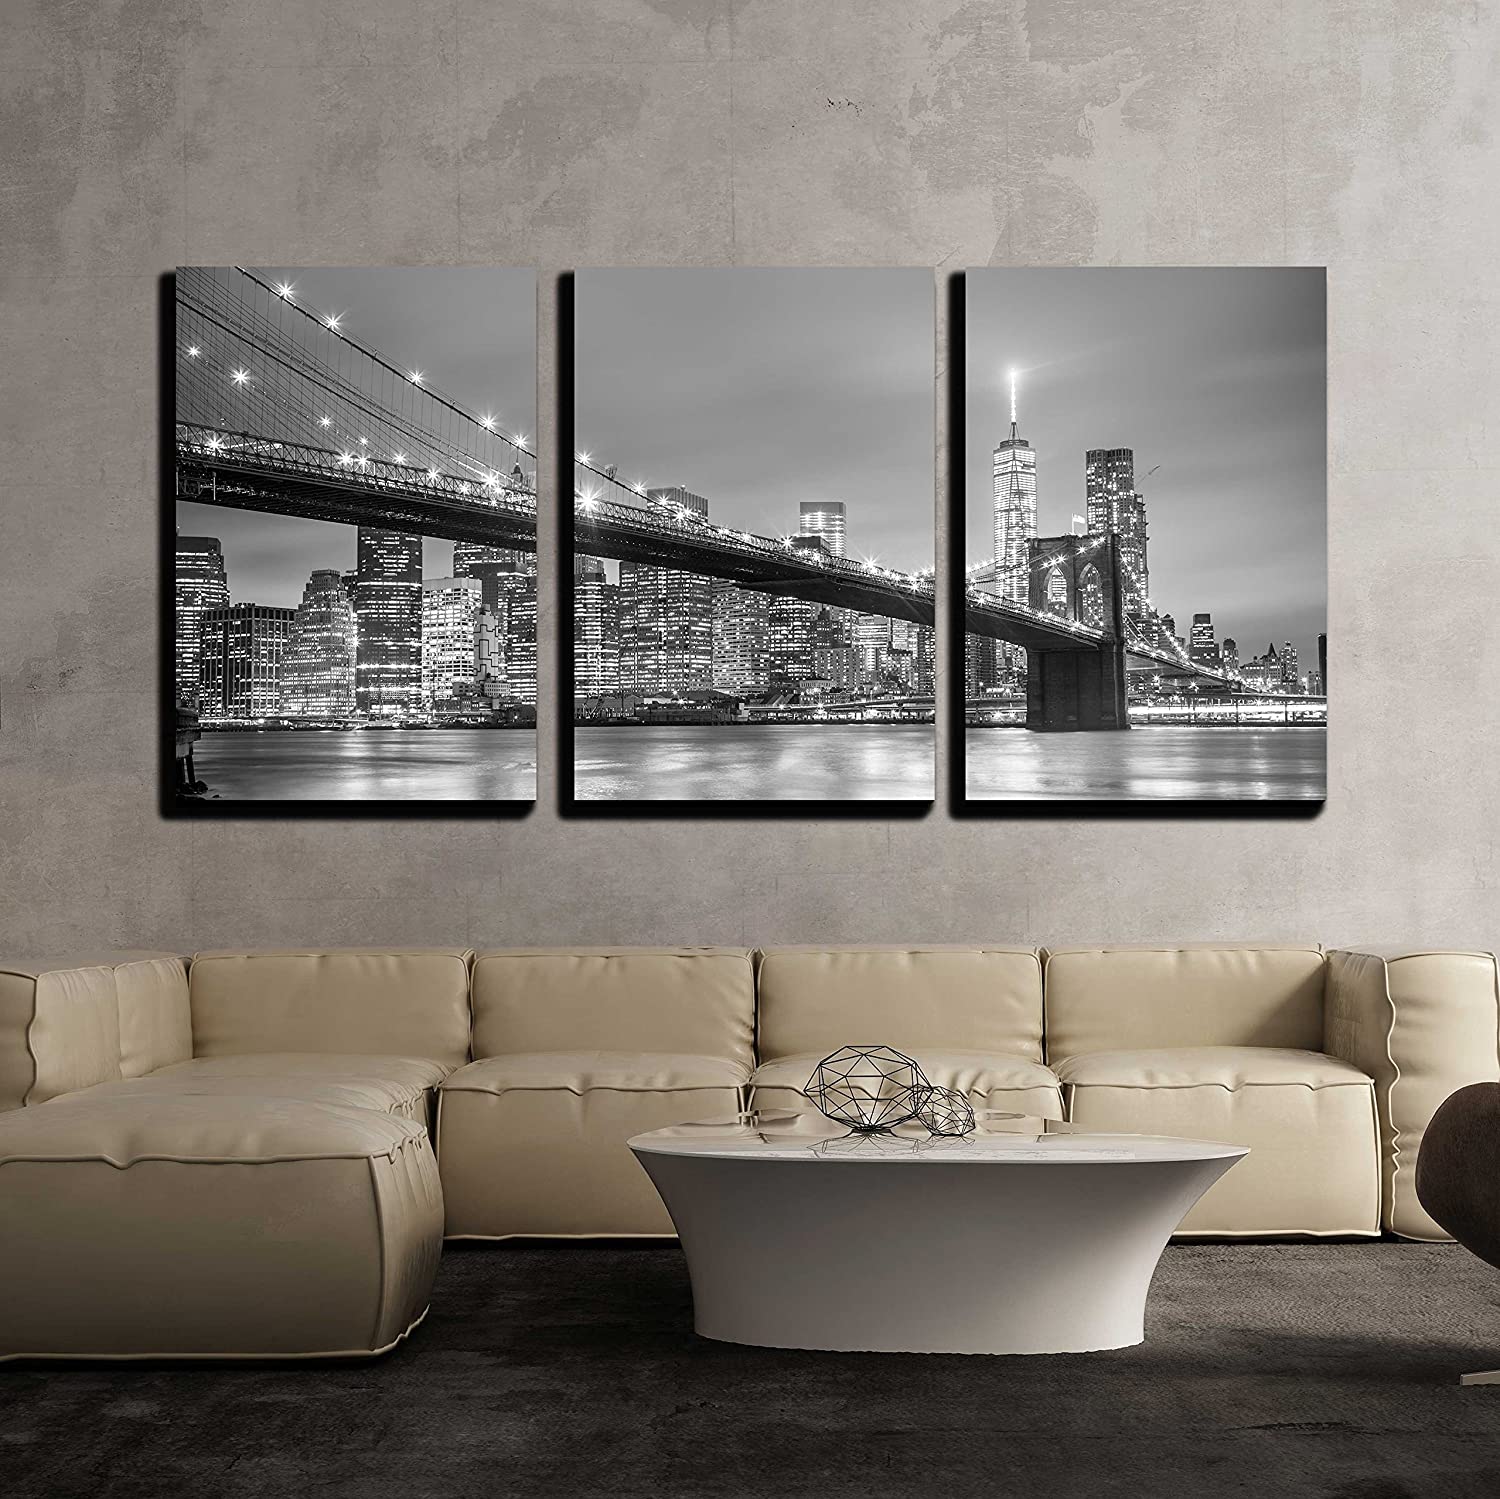 3 panel canvas for New York City decor in your home